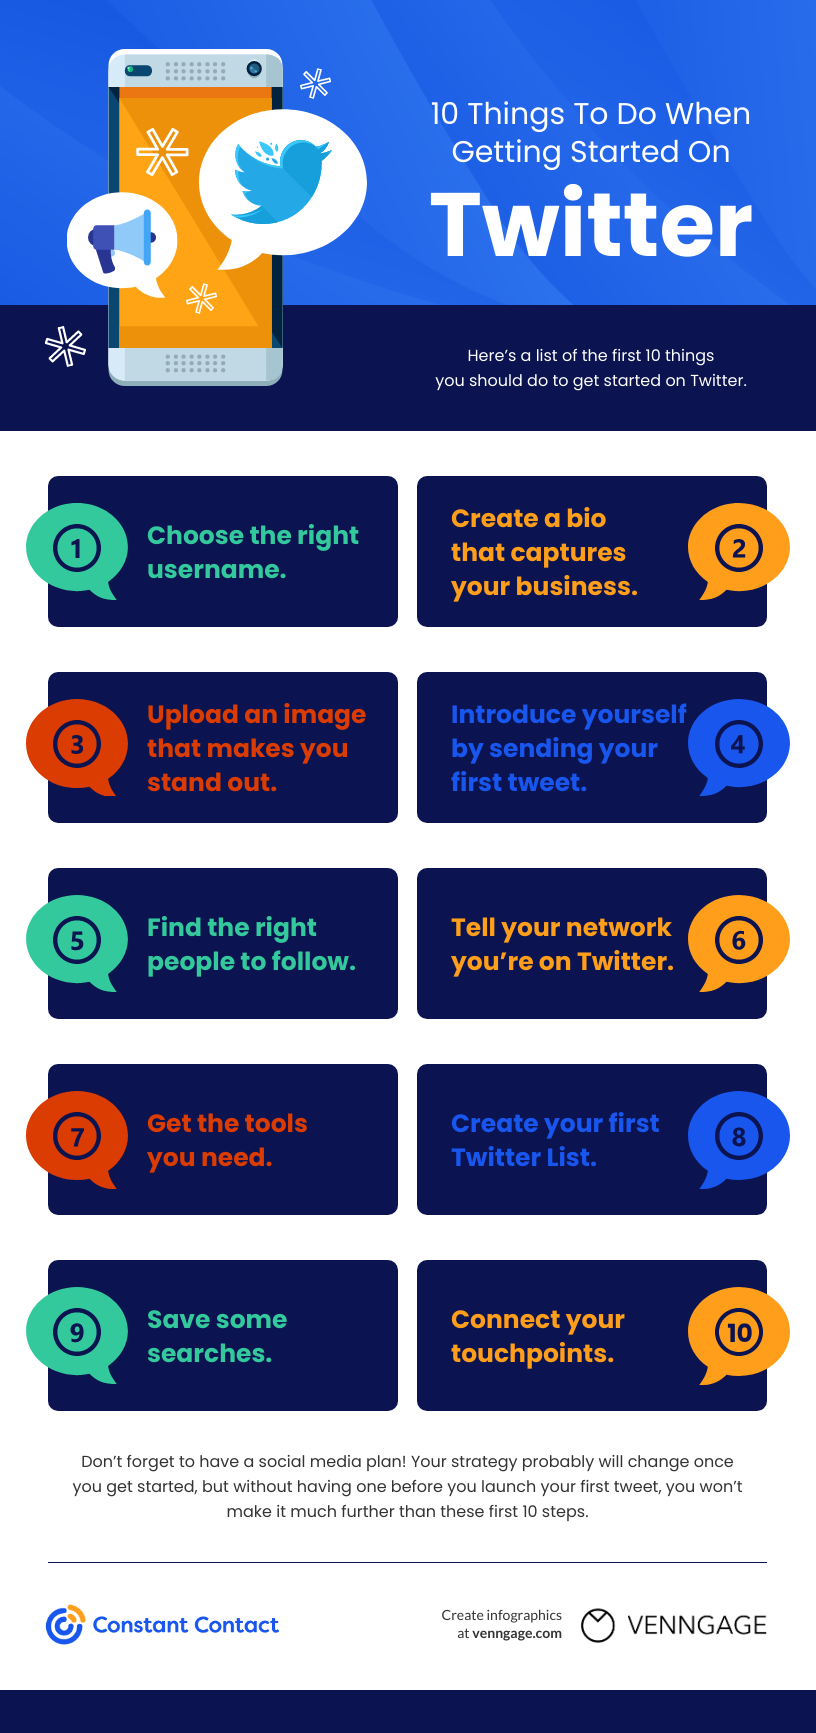 10 things to do when getting started on Twitter.